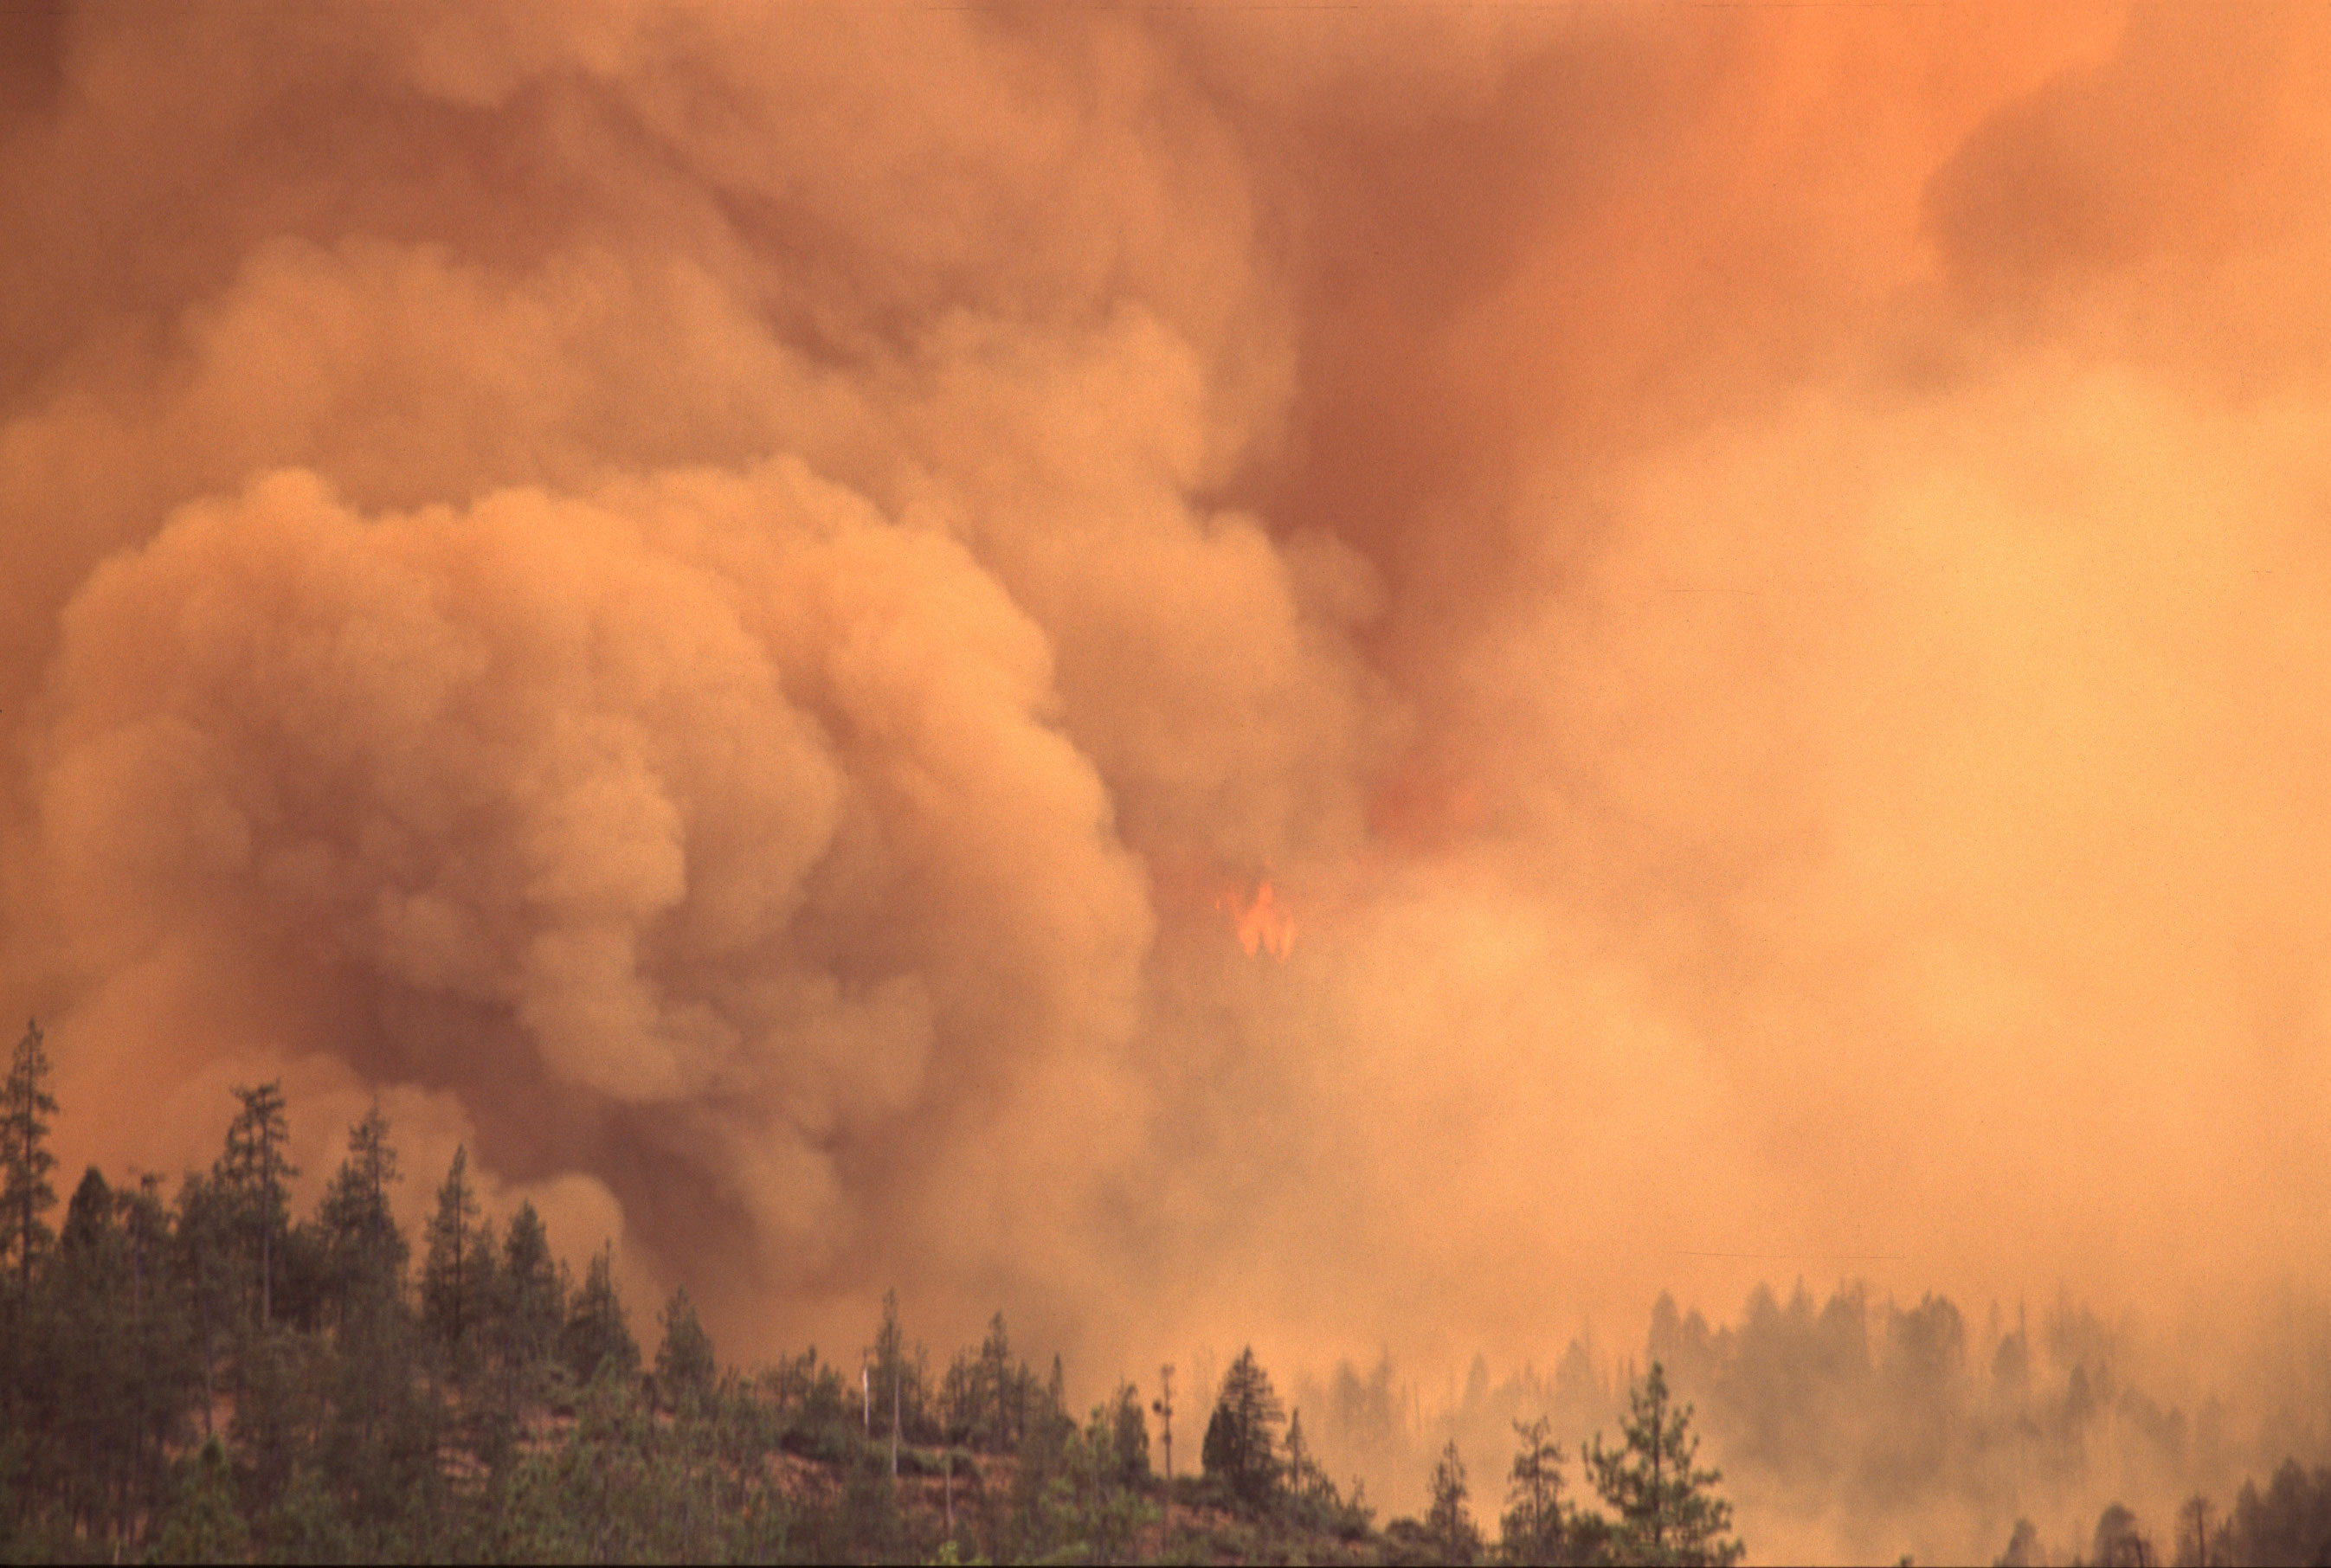 Wildfire in the Pacific Northwest • Foto: Bureau of Land Management Oregon and Washington (CC-BY 2.0)